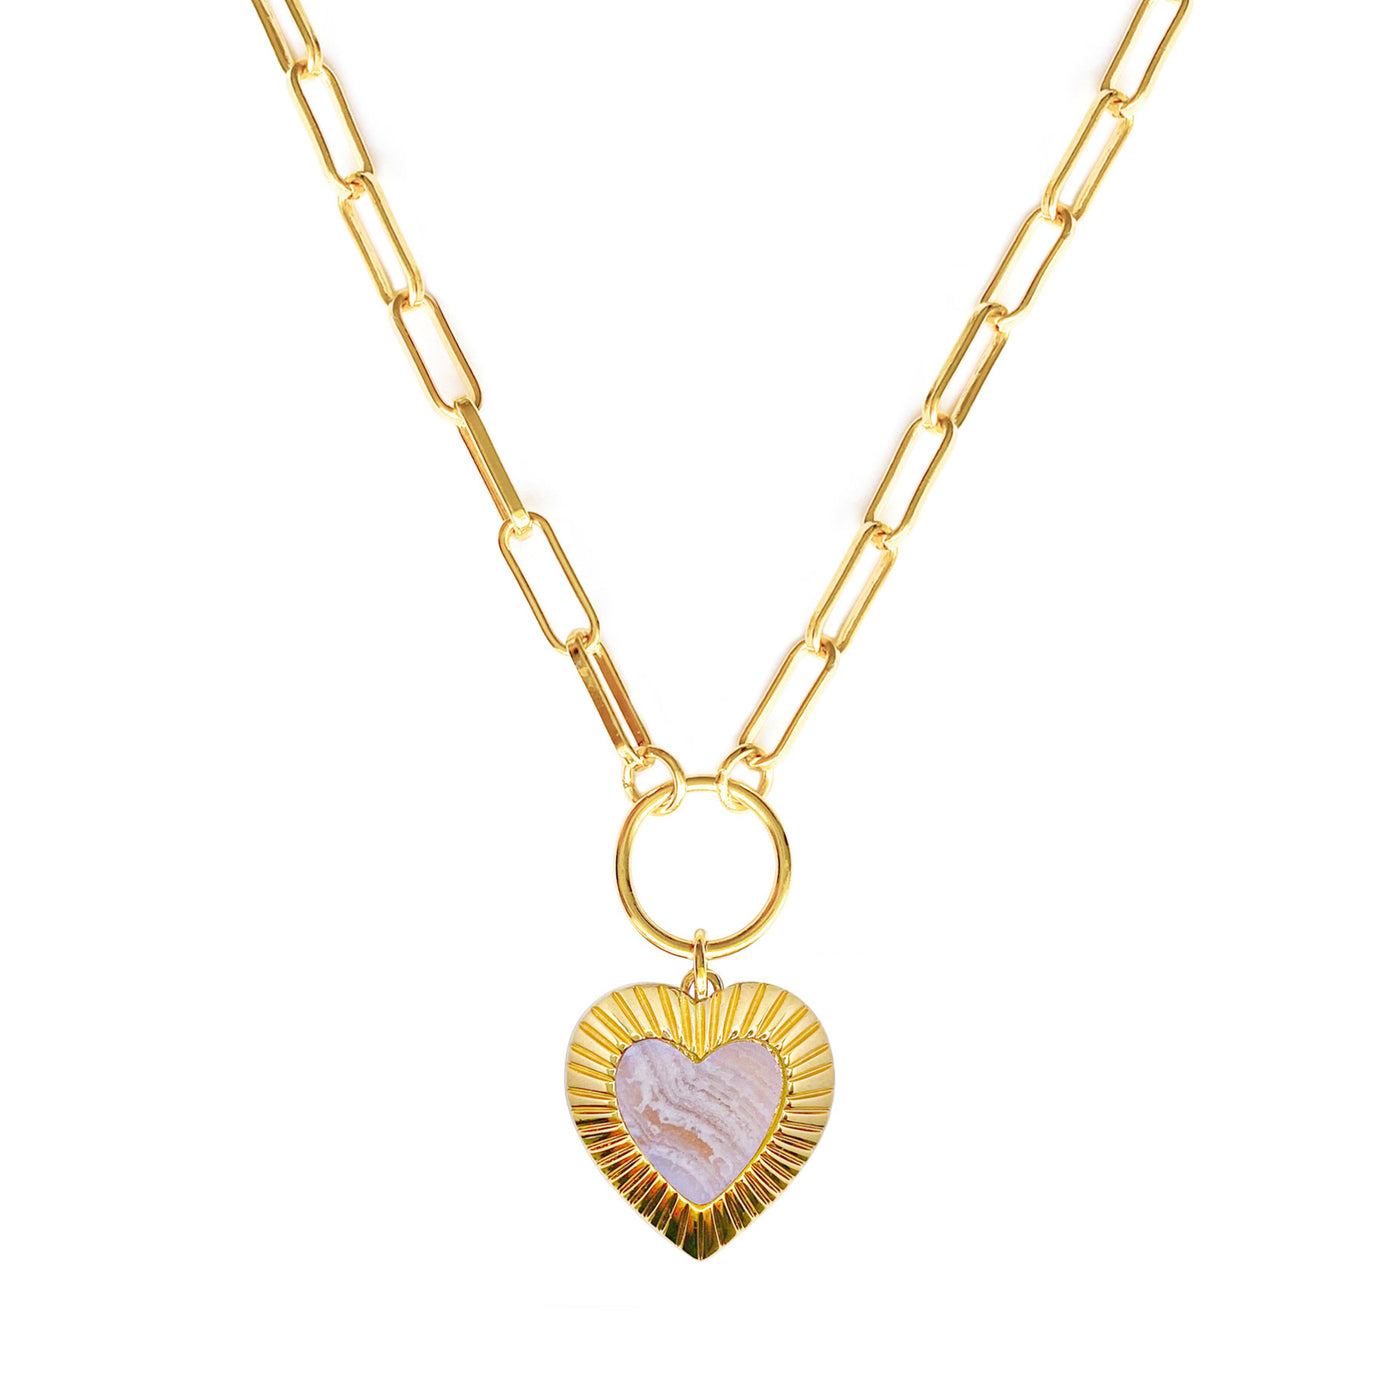 Gold chunky chain necklace with blue lace agate heart charm